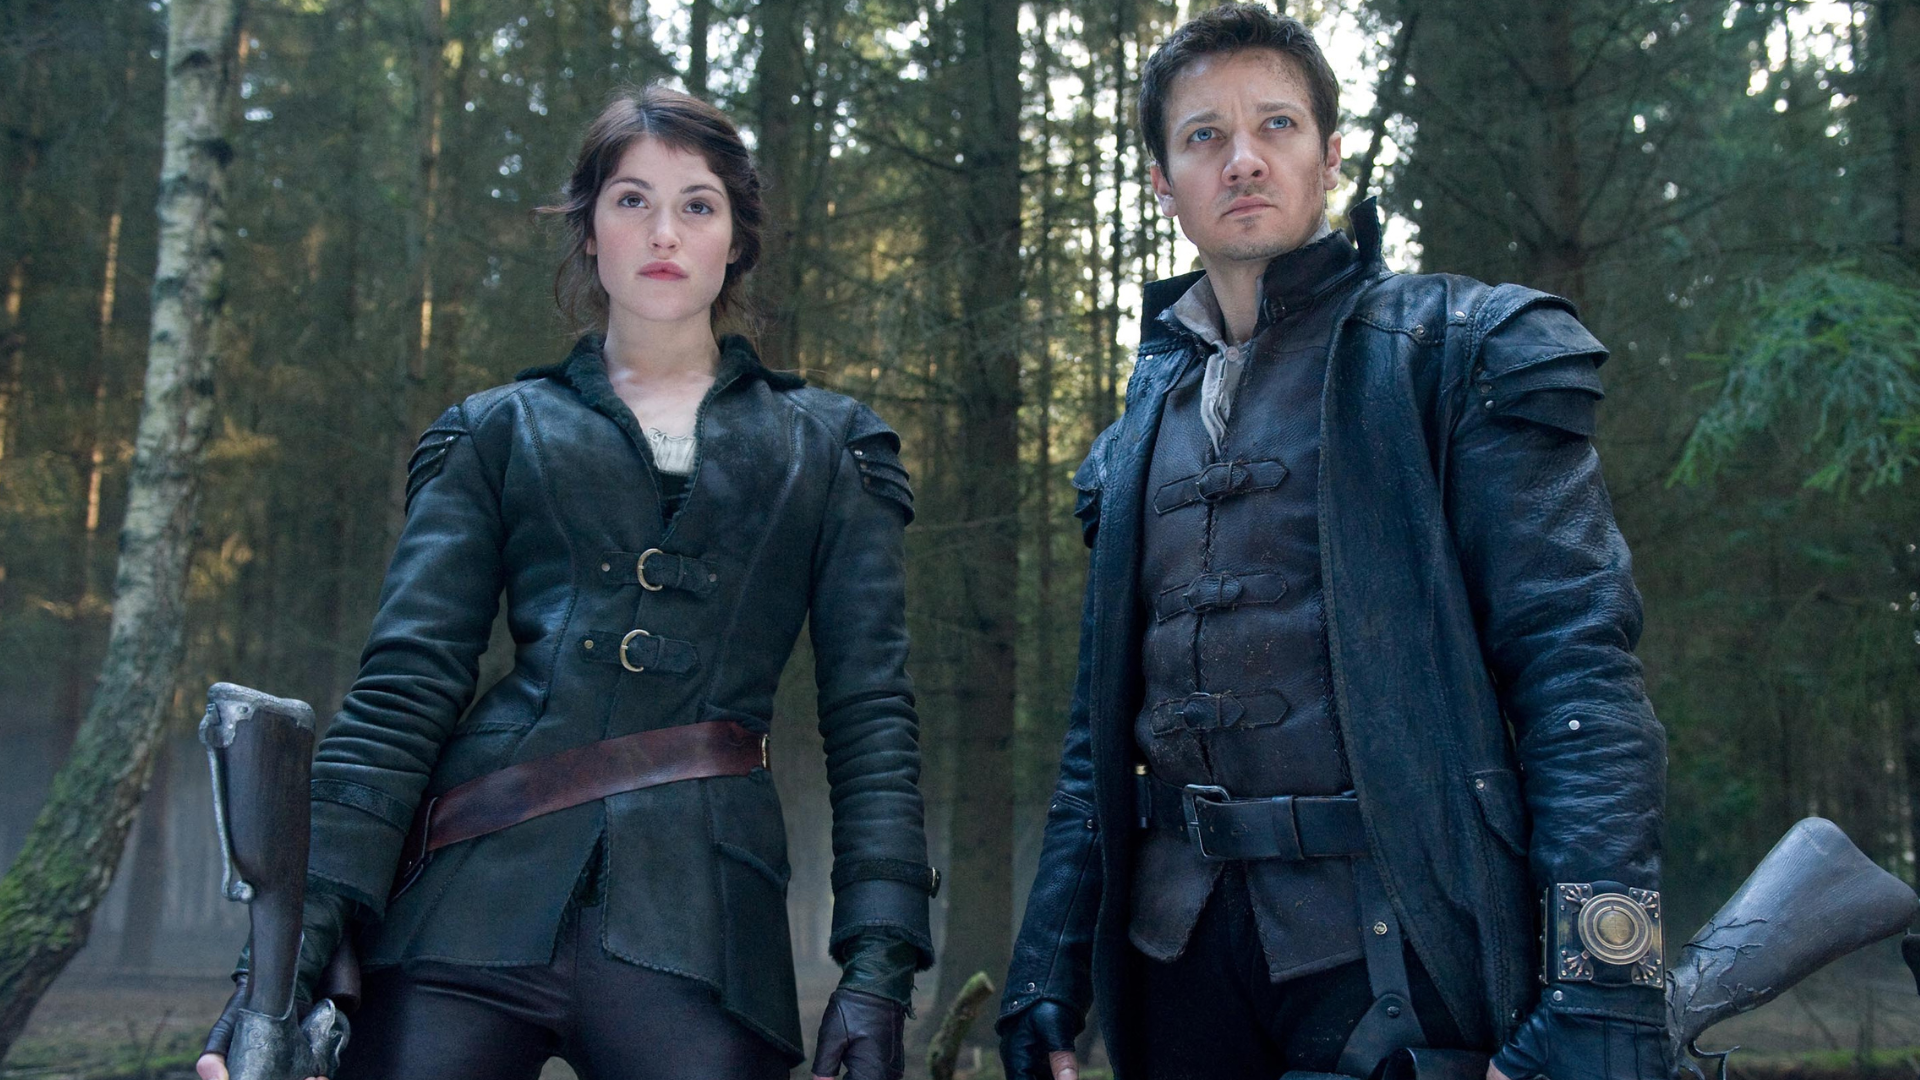 A man and woman in black leather armor stand in front of a forest. Both carry large firearms. 